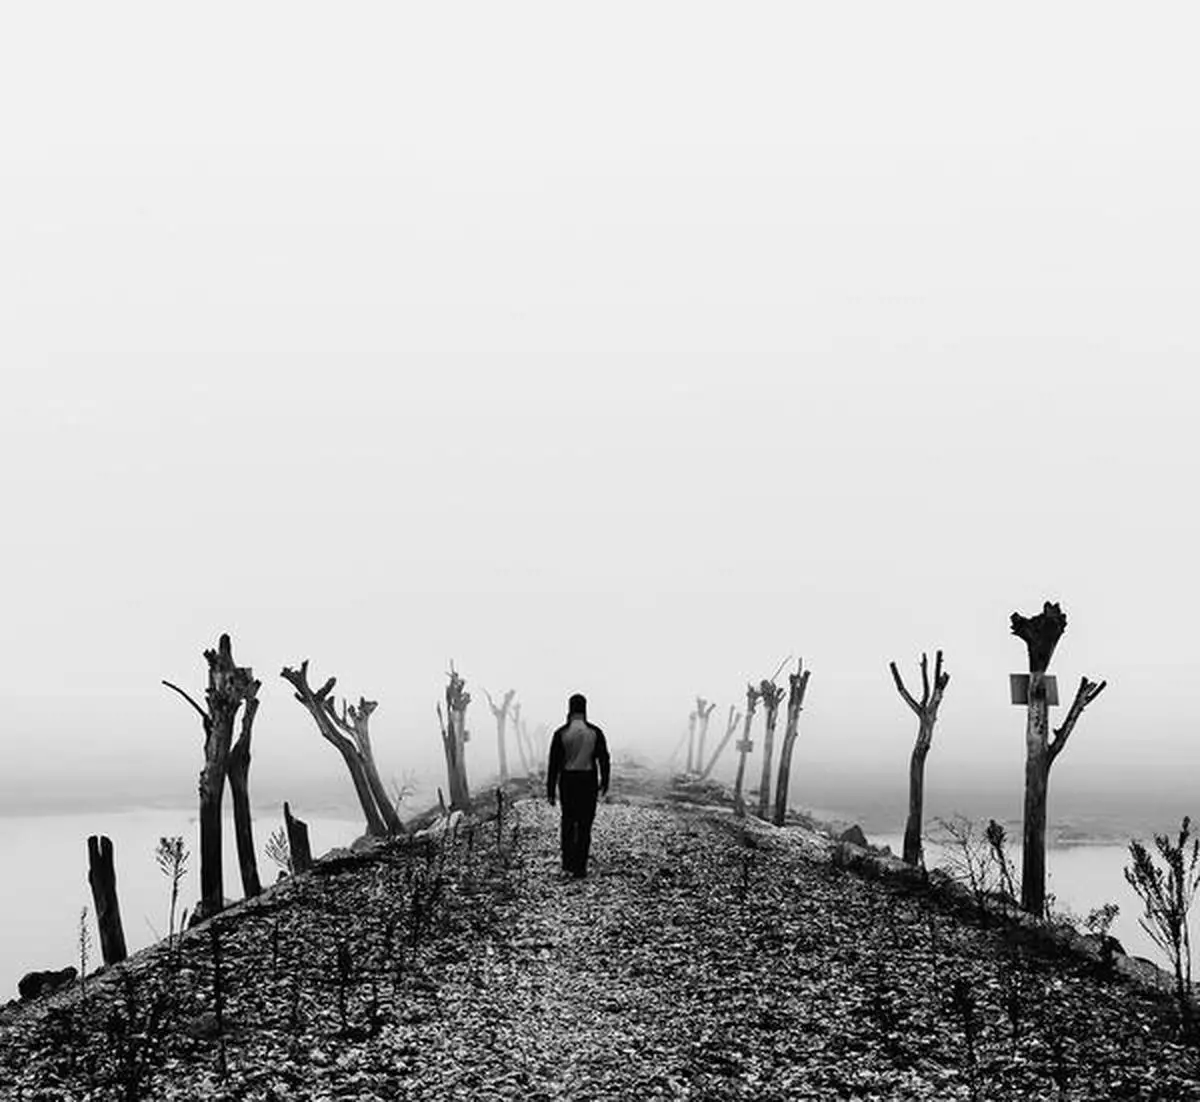 Fading to grey:  “Boundaries fall away between himself and everything, between existing and not. To be in the moment. That’s all he wants. No future, no past”  shutterstock/carlosobriganti